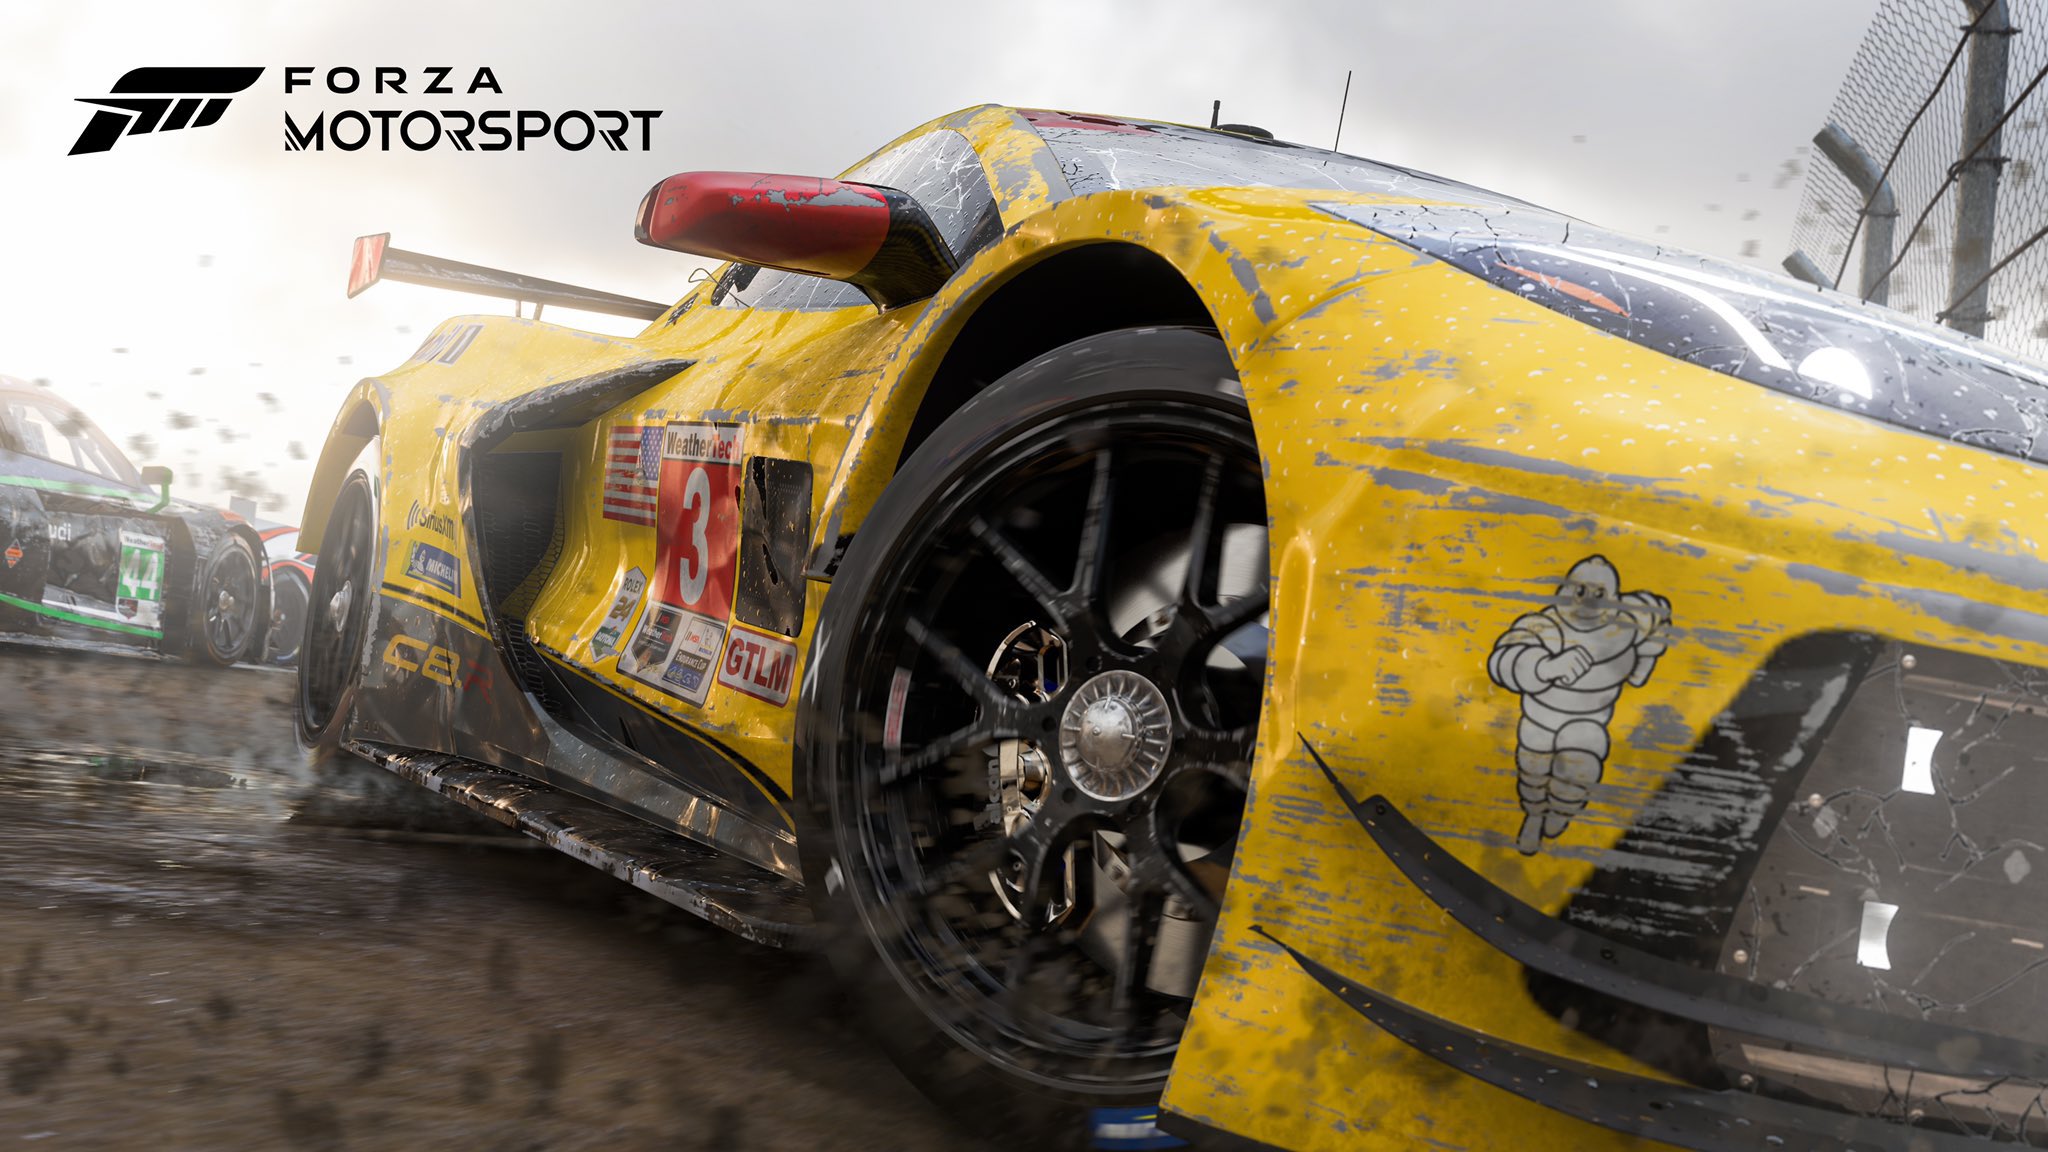 Jamie Moran on X: The First Forza Horizon game popped up again in